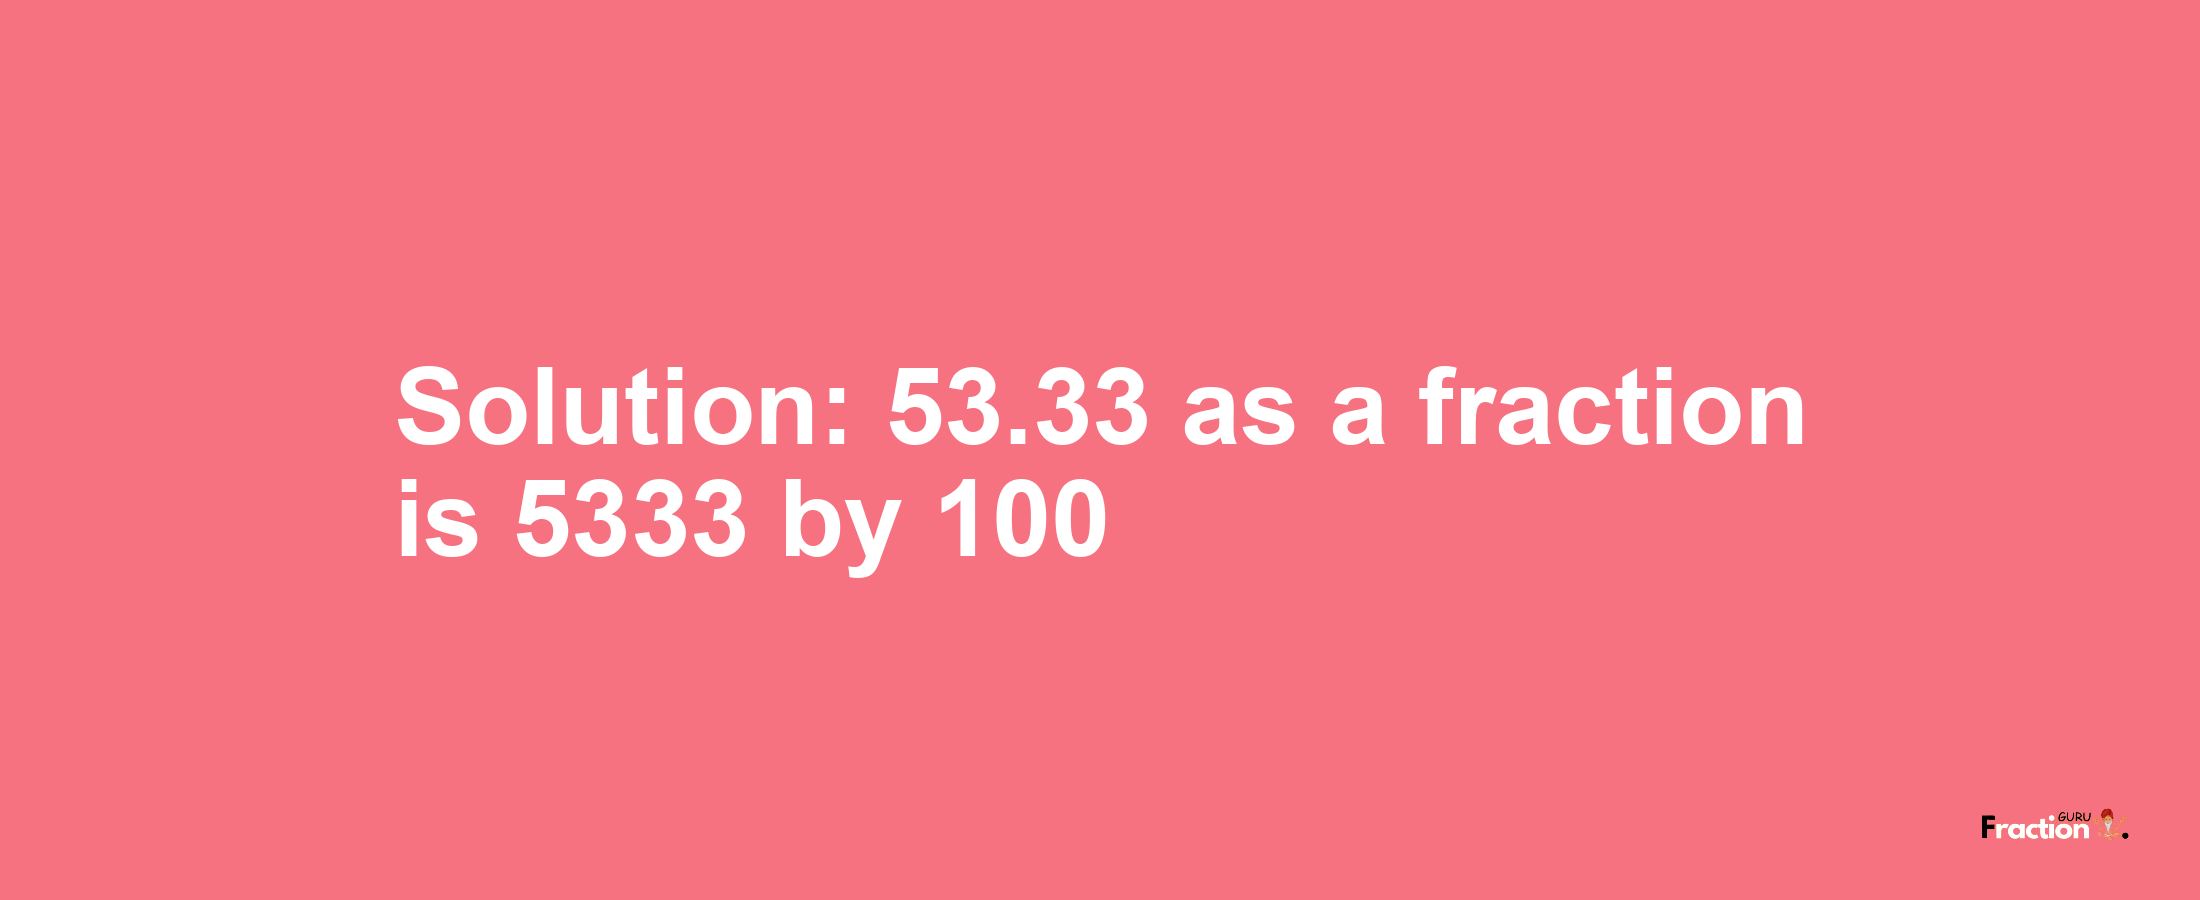 Solution:53.33 as a fraction is 5333/100